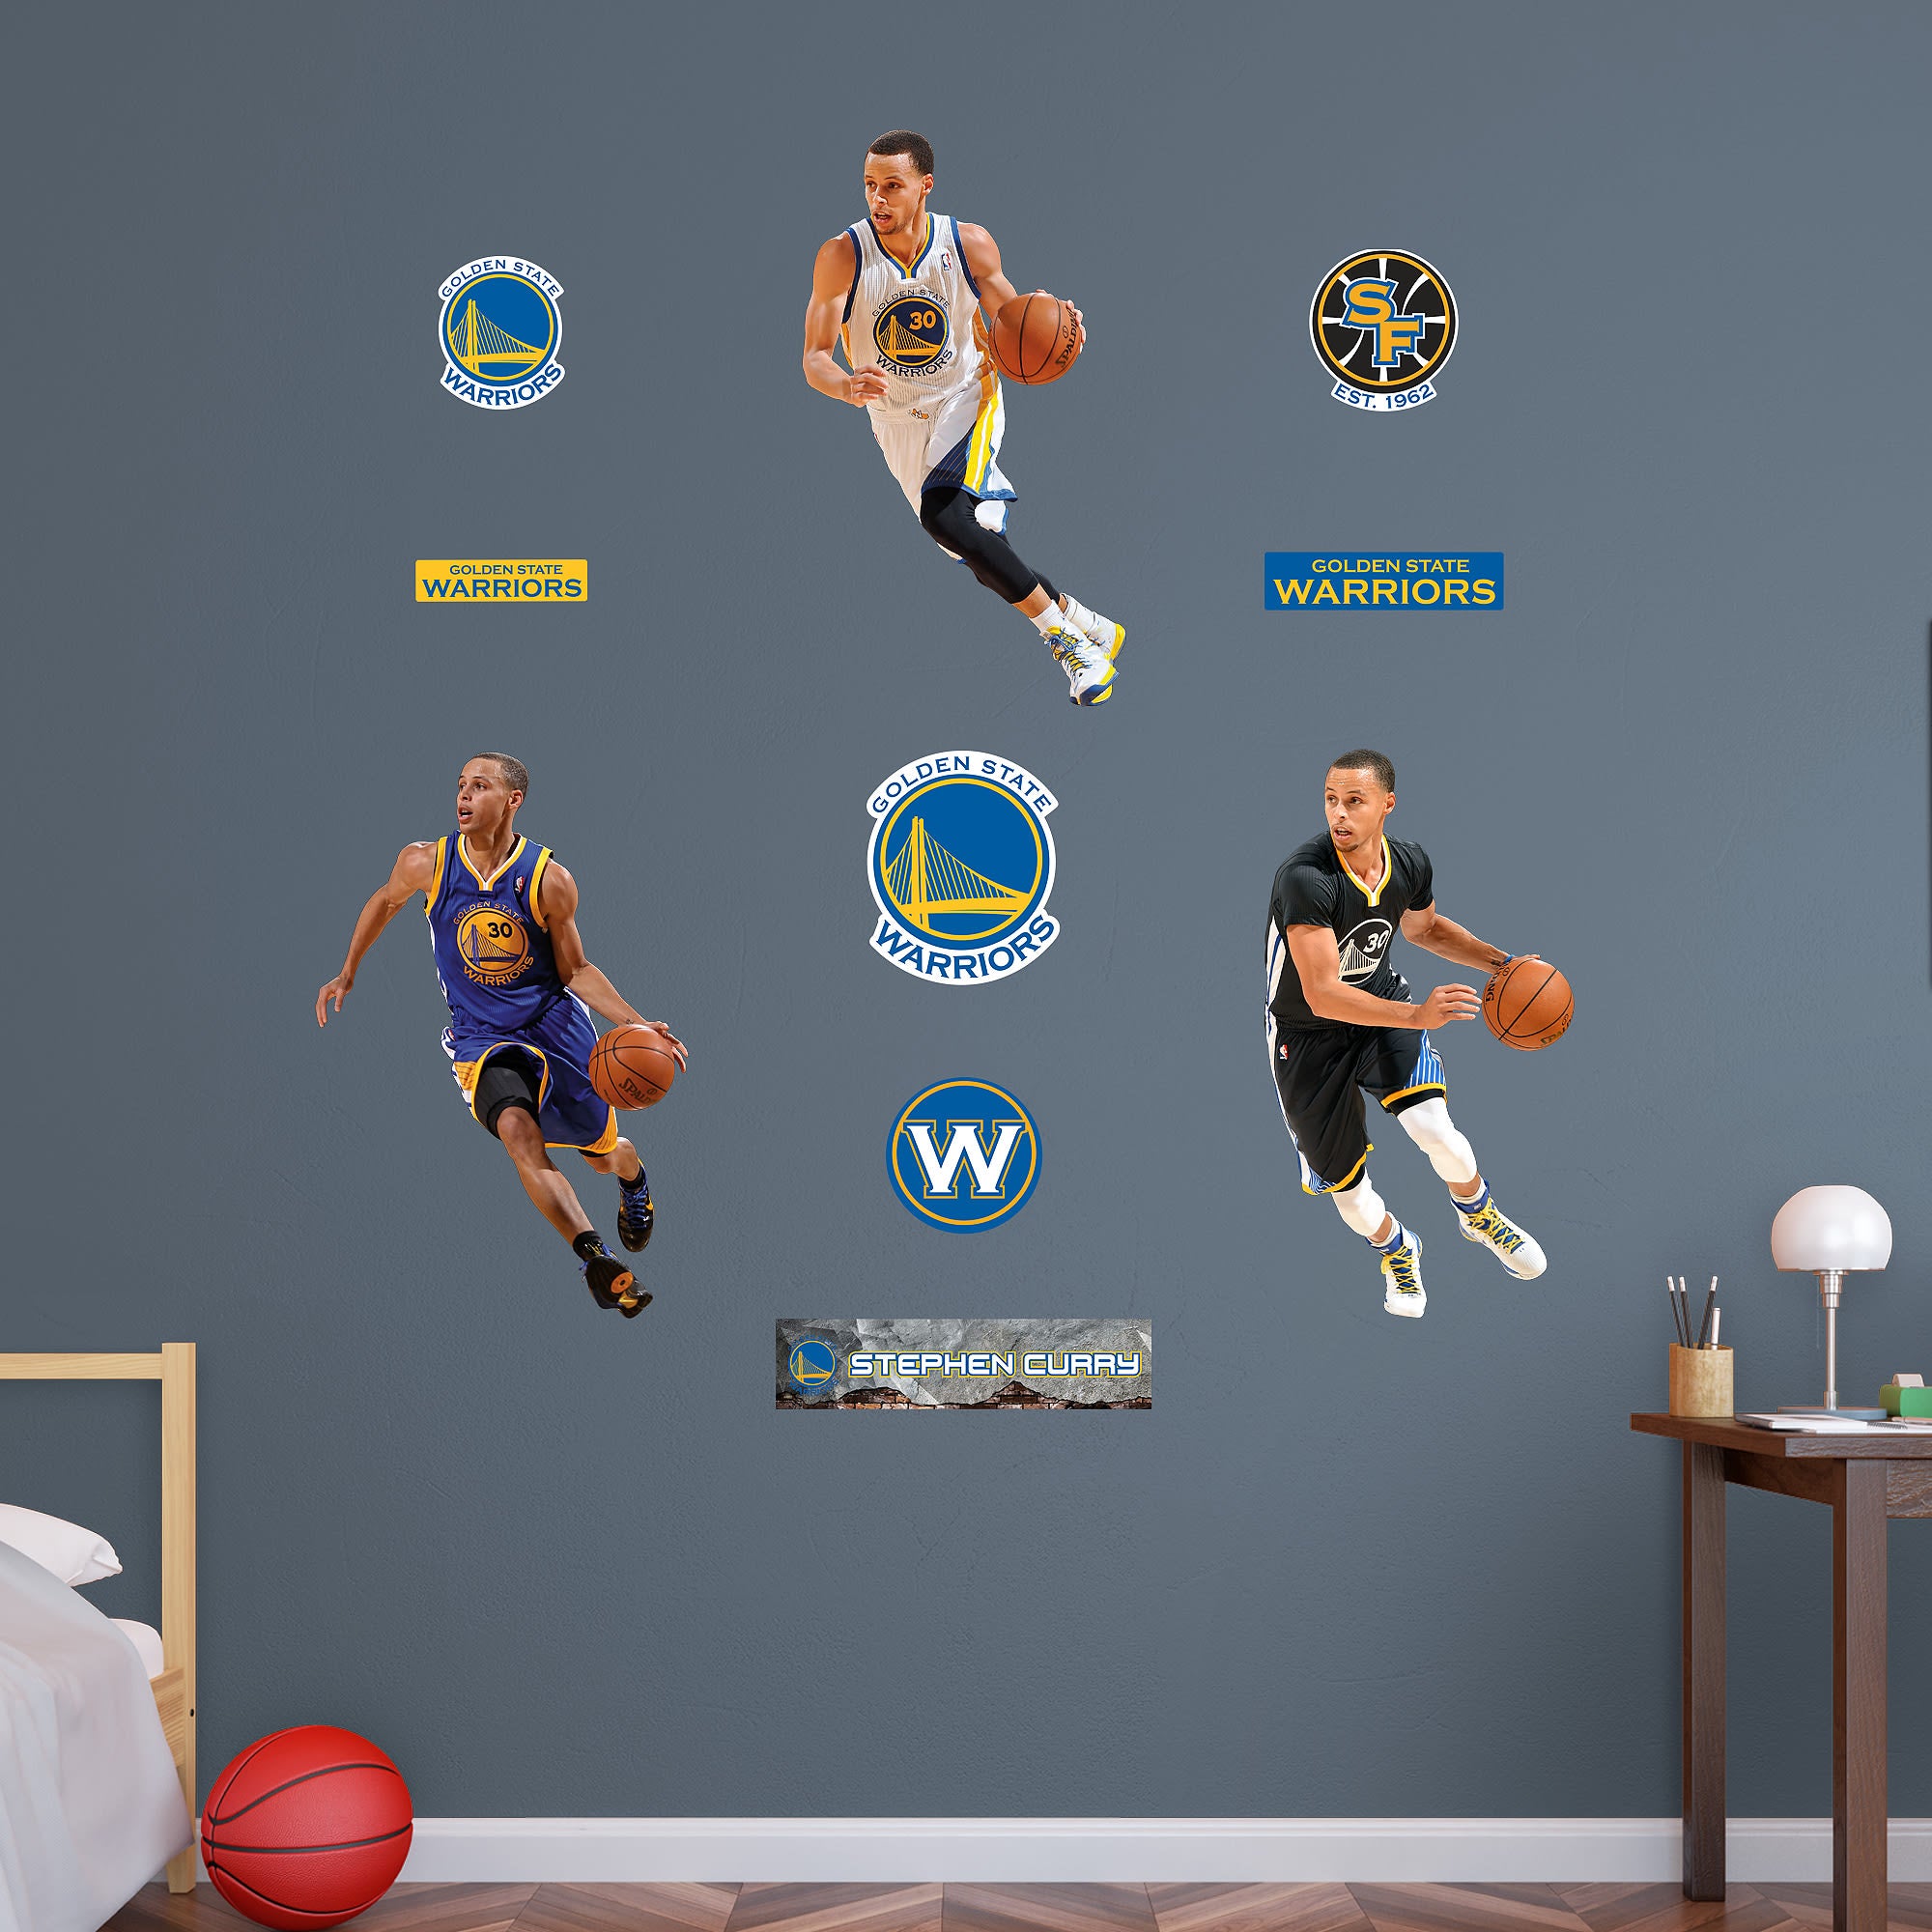 Stephen Curry for Golden State Warriors: Hero Pack - Officially Licensed NBA Removable Wall Decal 39.5"W x 52.0"H by Fathead | V